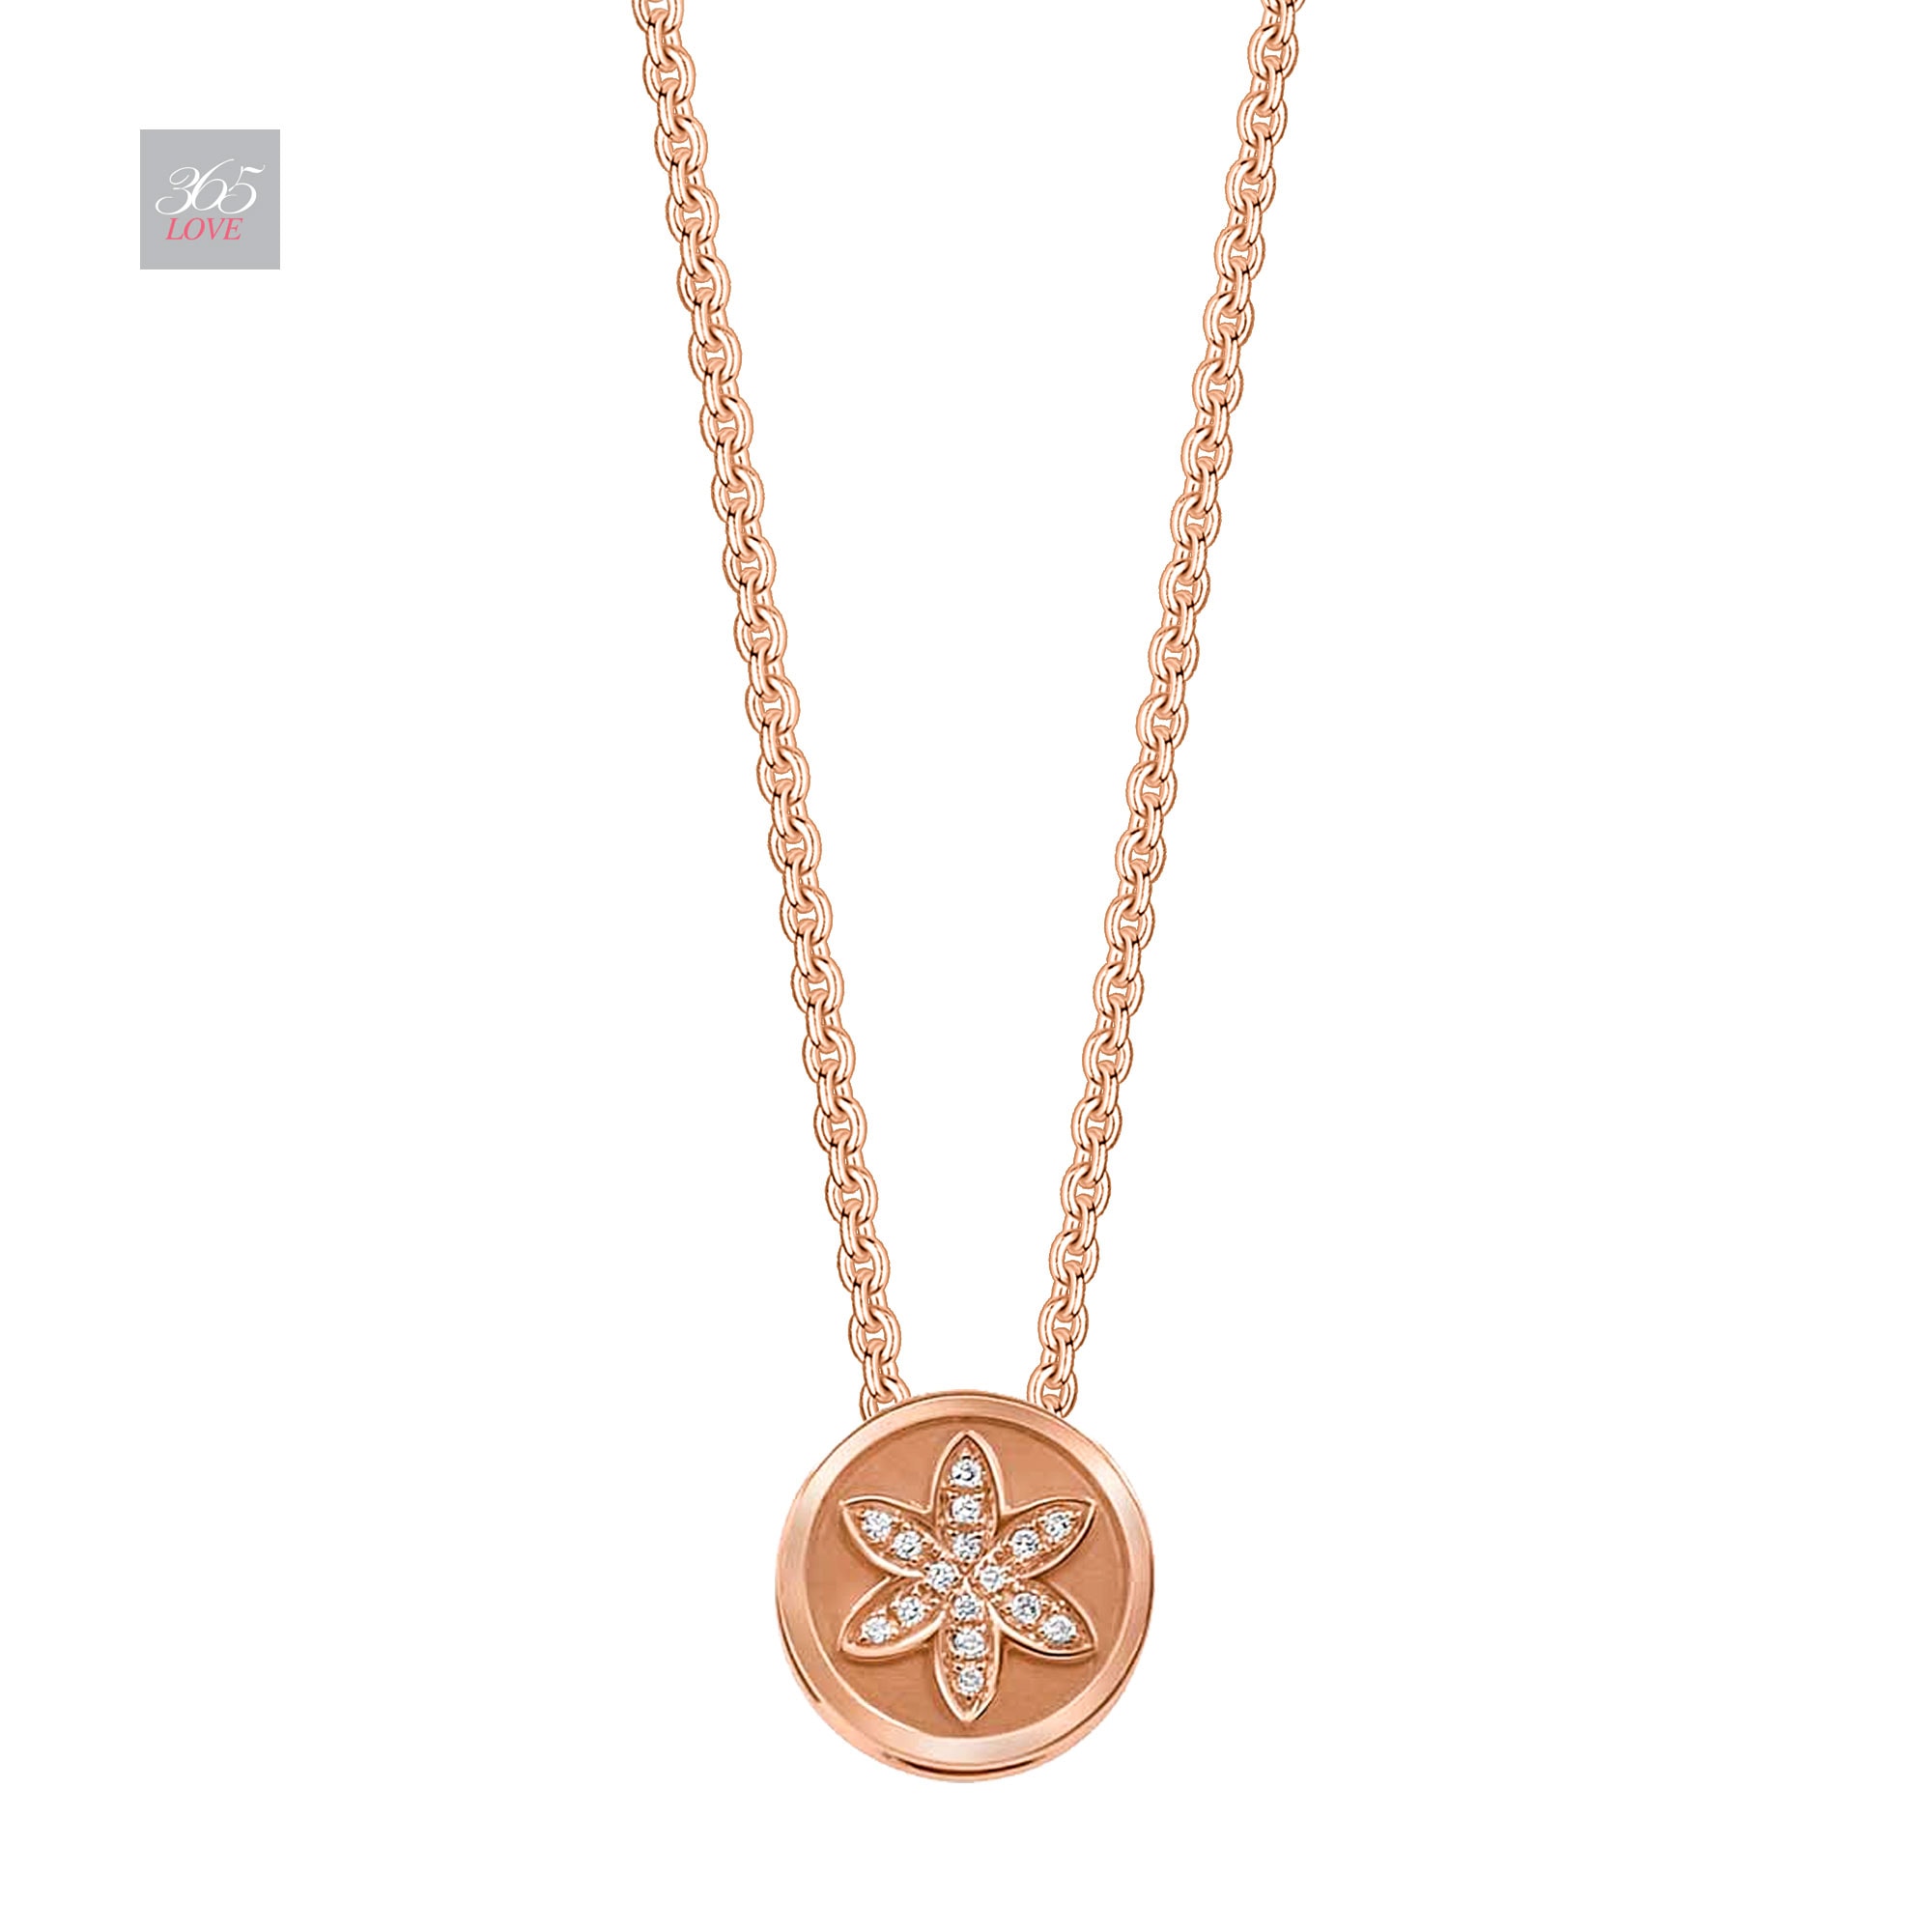 Pendant in 18k rose gold with diamonds, small.